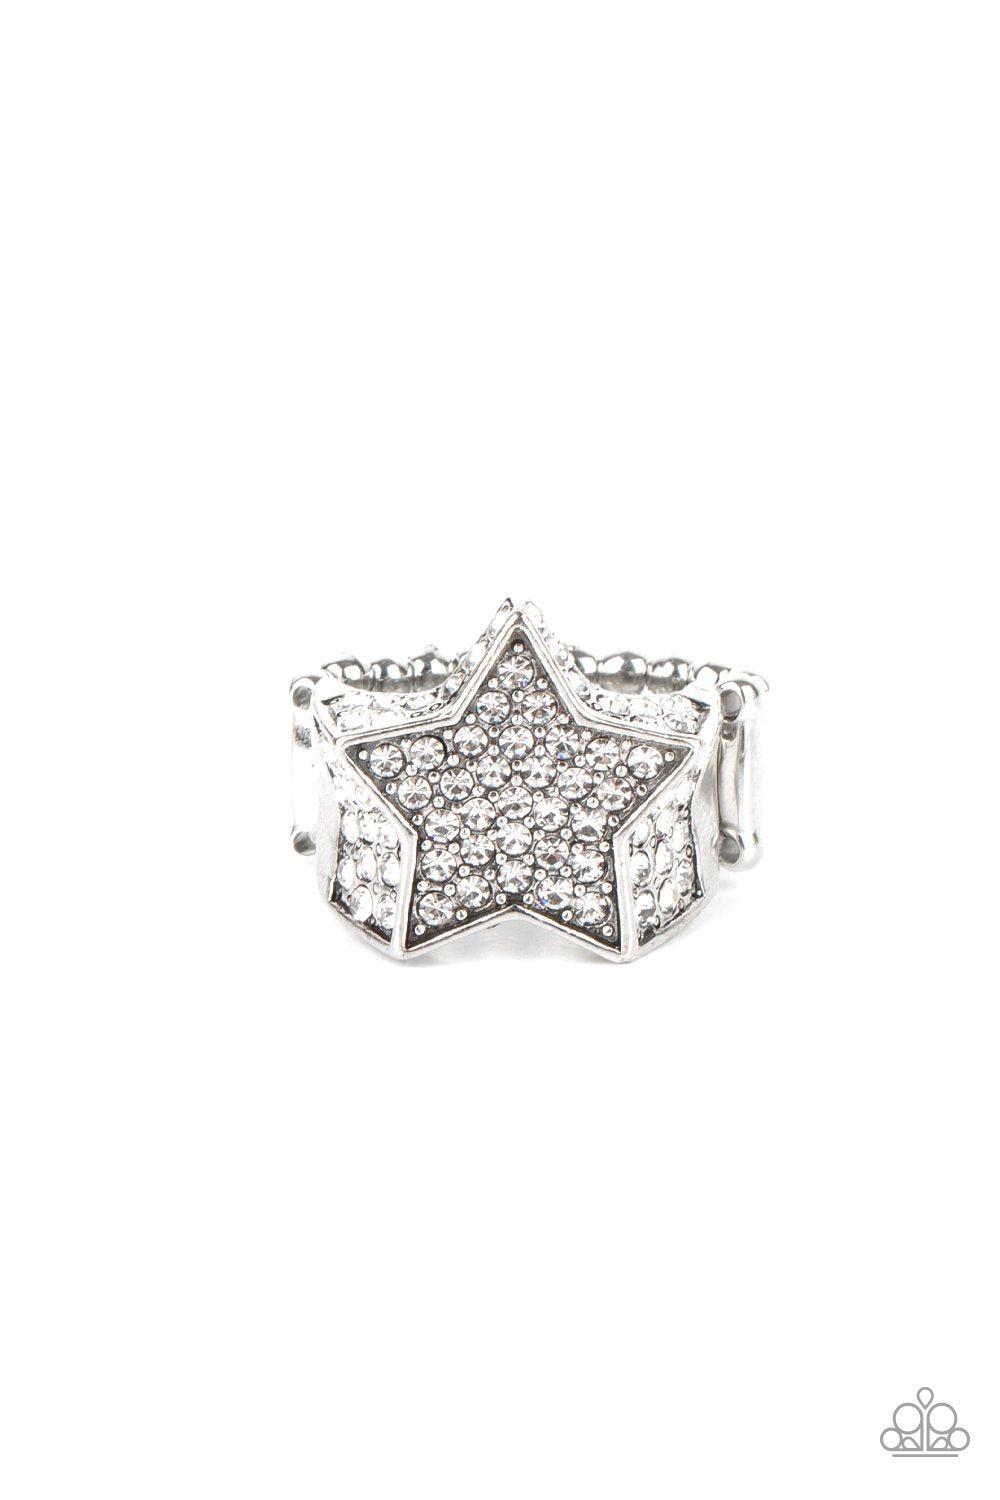 Here Come The Fireworks White Rhinestone Star Ring - Paparazzi Accessories- lightbox - CarasShop.com - $5 Jewelry by Cara Jewels